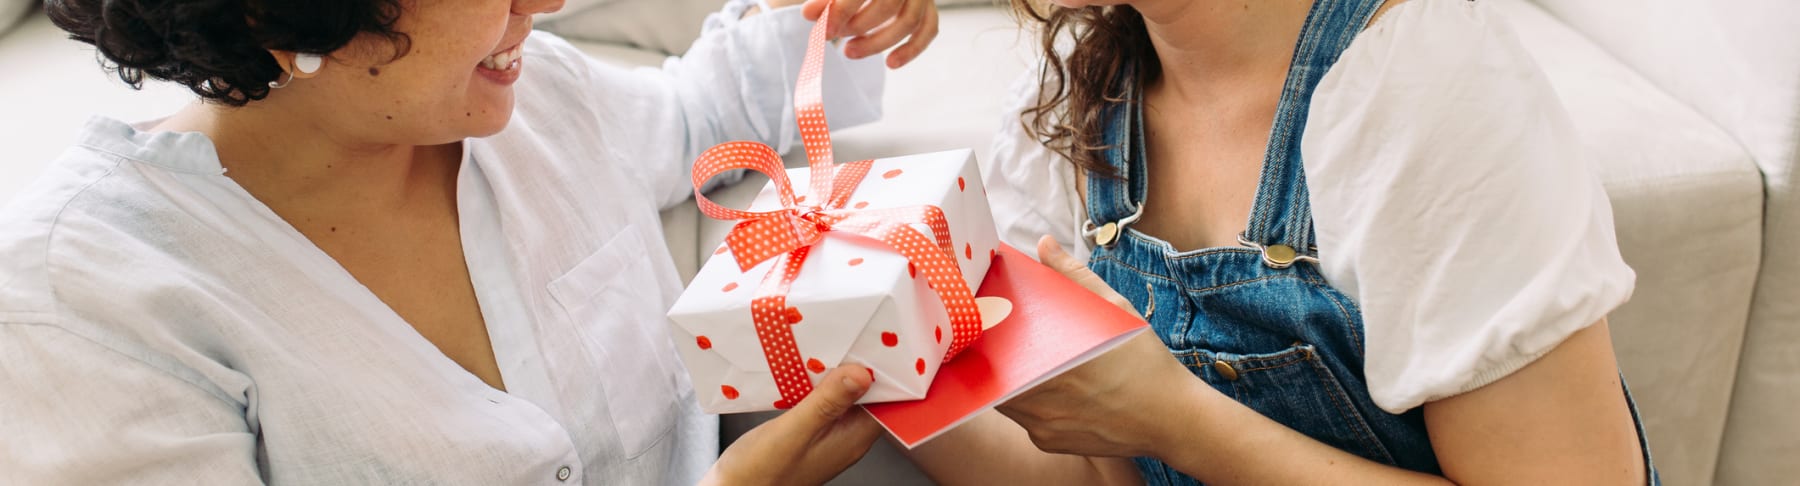 Woman opens gift from girlfriend.